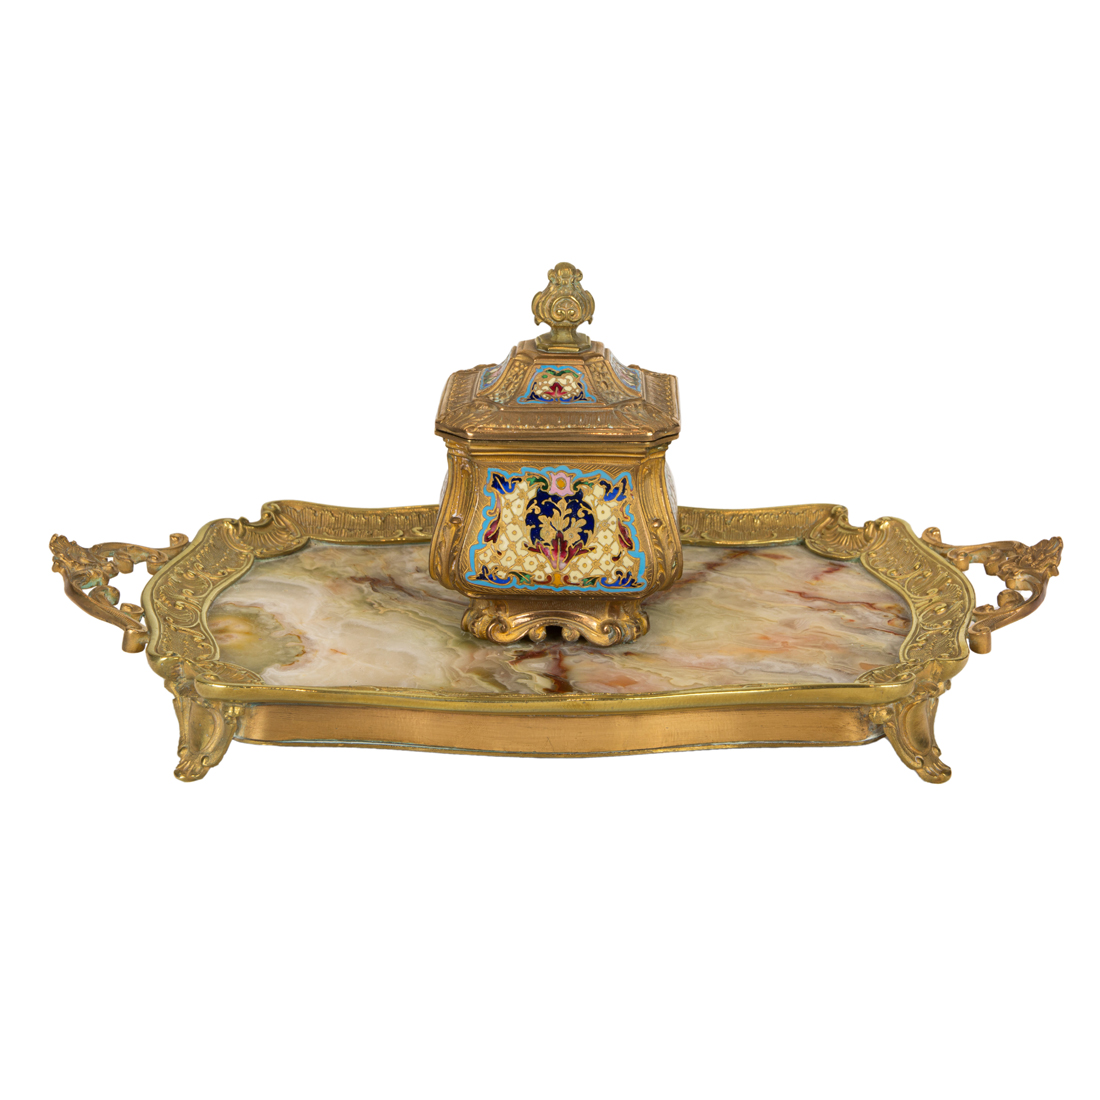 A FRENCH CHAMPLEVE ENAMEL INKWELL